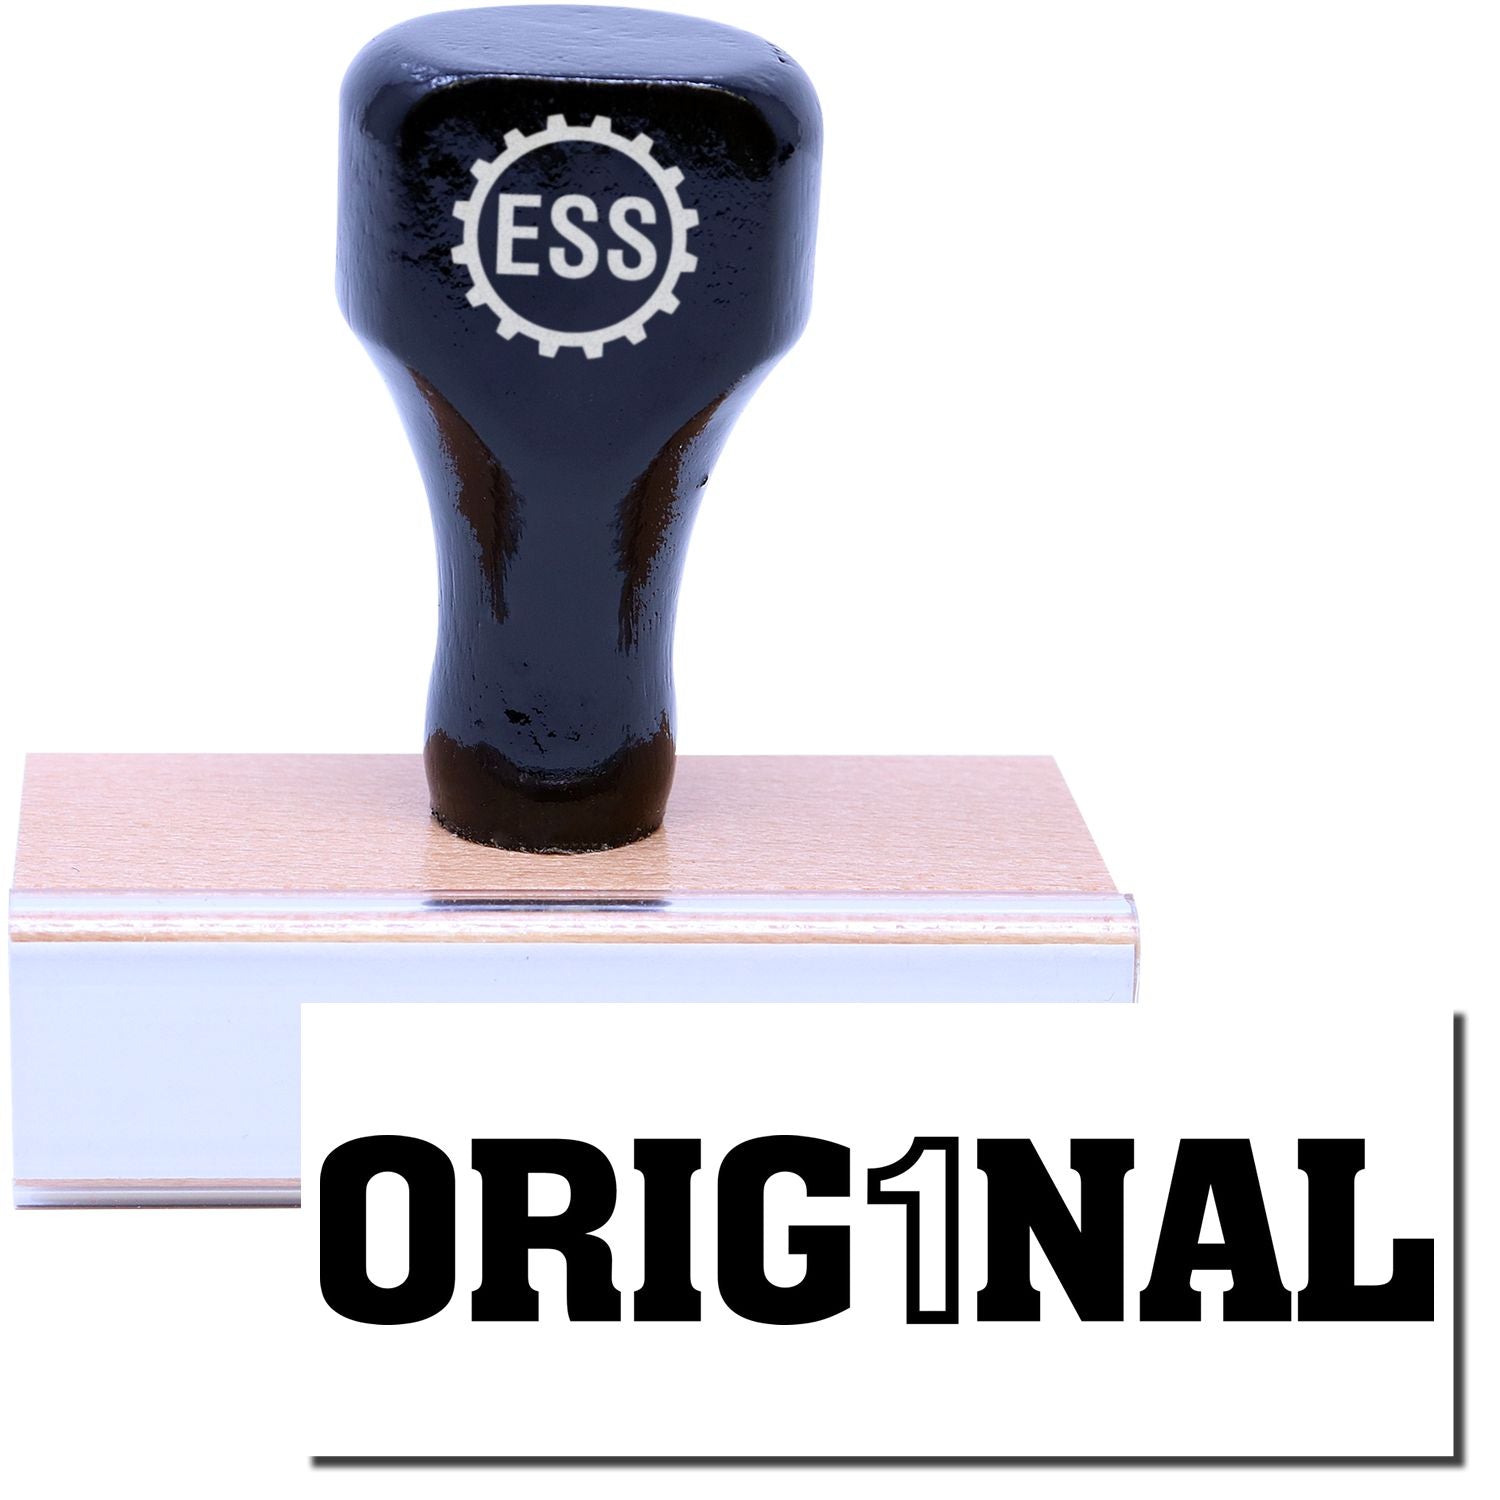 A stock office rubber stamp with a stamped image showing how the text "ORIG1NAL" in a large font is displayed after stamping.